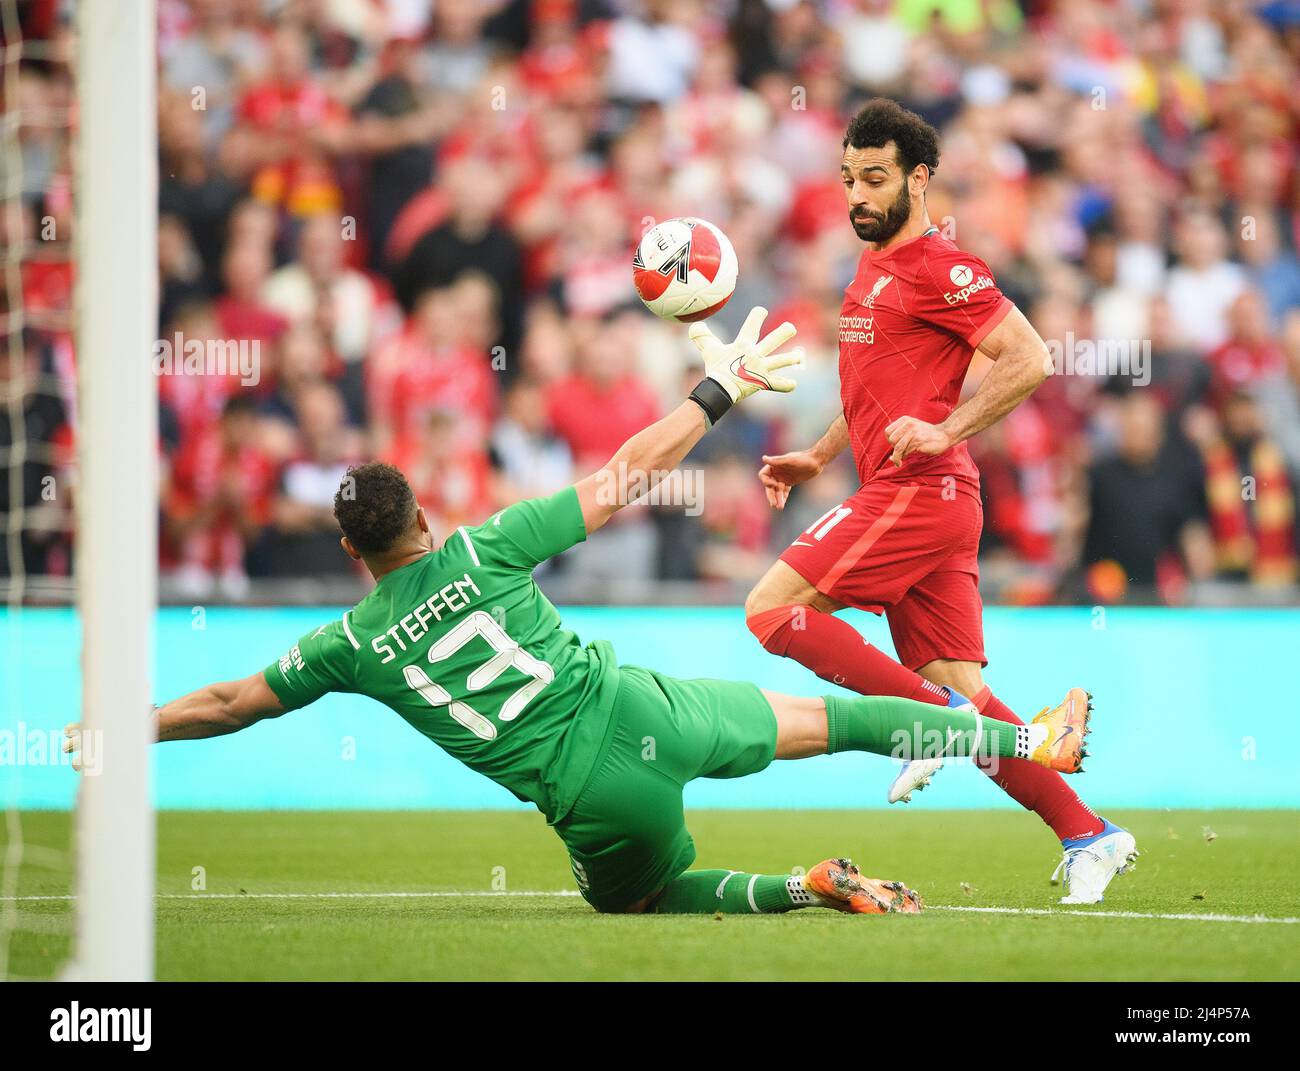 London, UK. 16 April 2022 - Manchester City v Liverpool - Emirates FA Cup - Semi Final - Wembley Stadium  Mohamed Salah chips the ball over Zack Steffen during the FA Cup Semi-Final against Manchester City Picture Credit : © Mark Pain / Alamy Live News Stock Photo